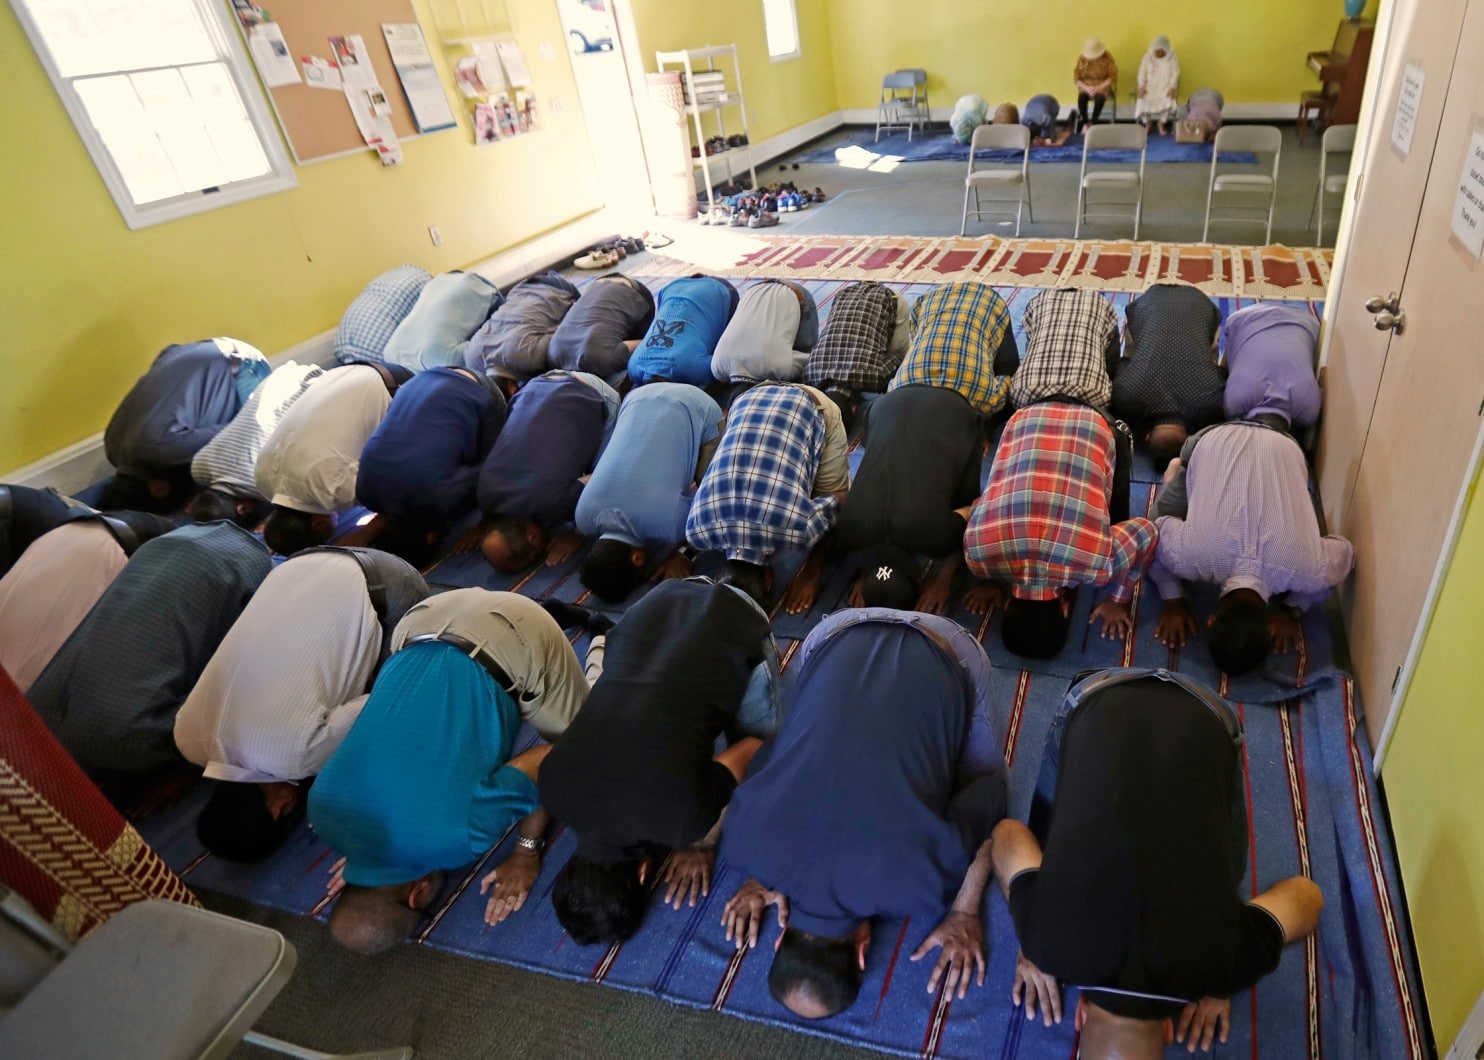 Muslim Americans Are Winning The Battle to Construct Their Own Mosques